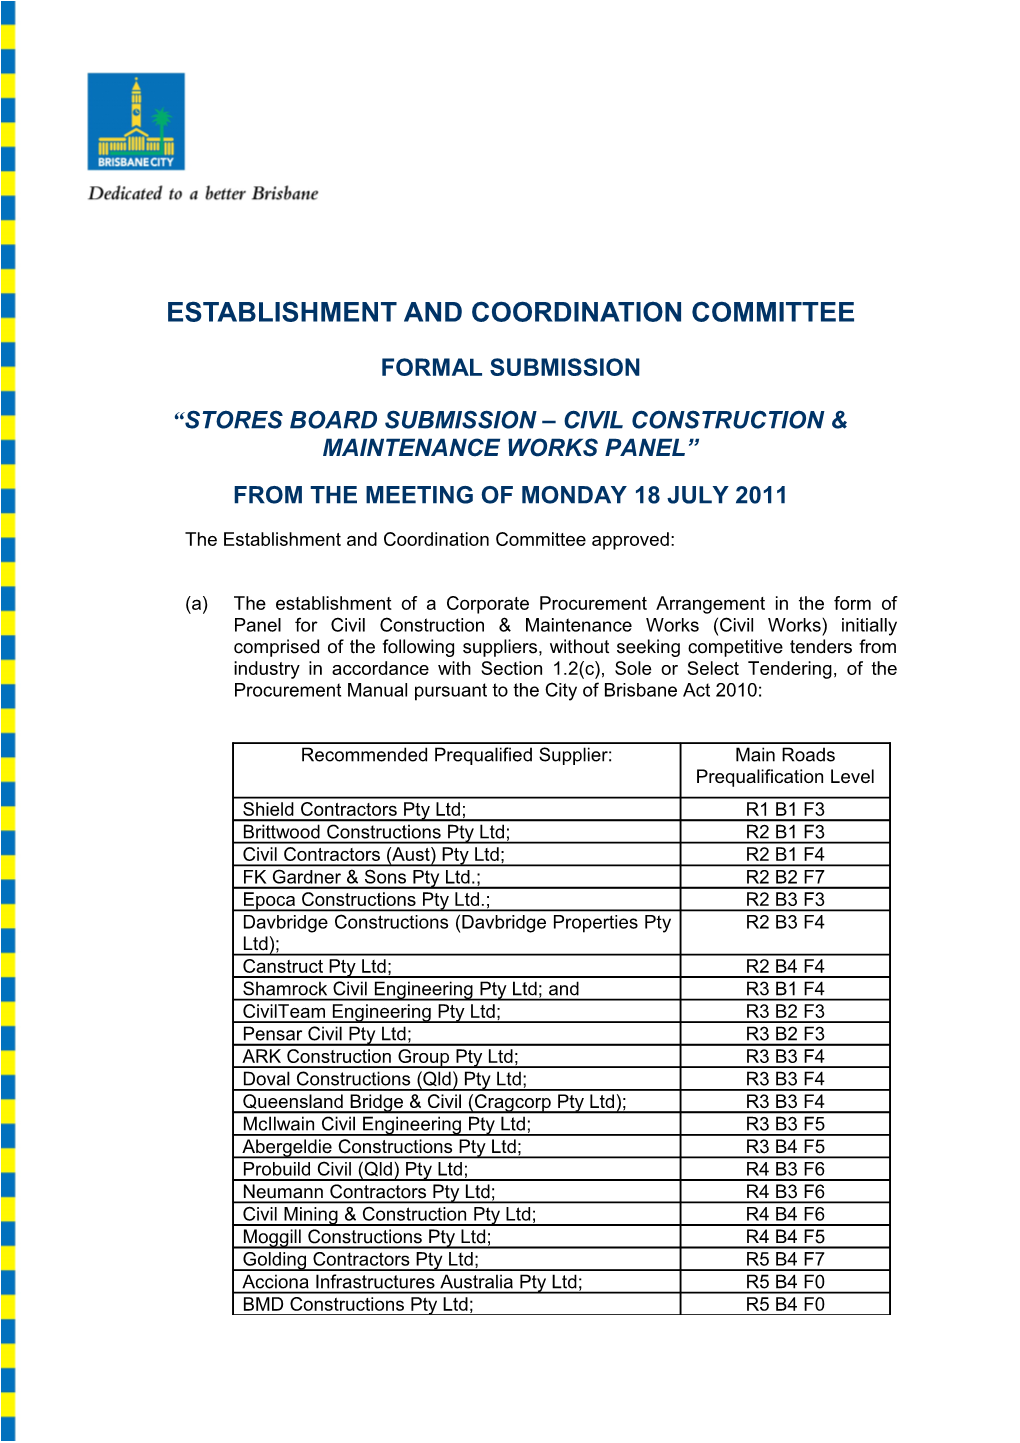 Establishment and Coordination Committee s1